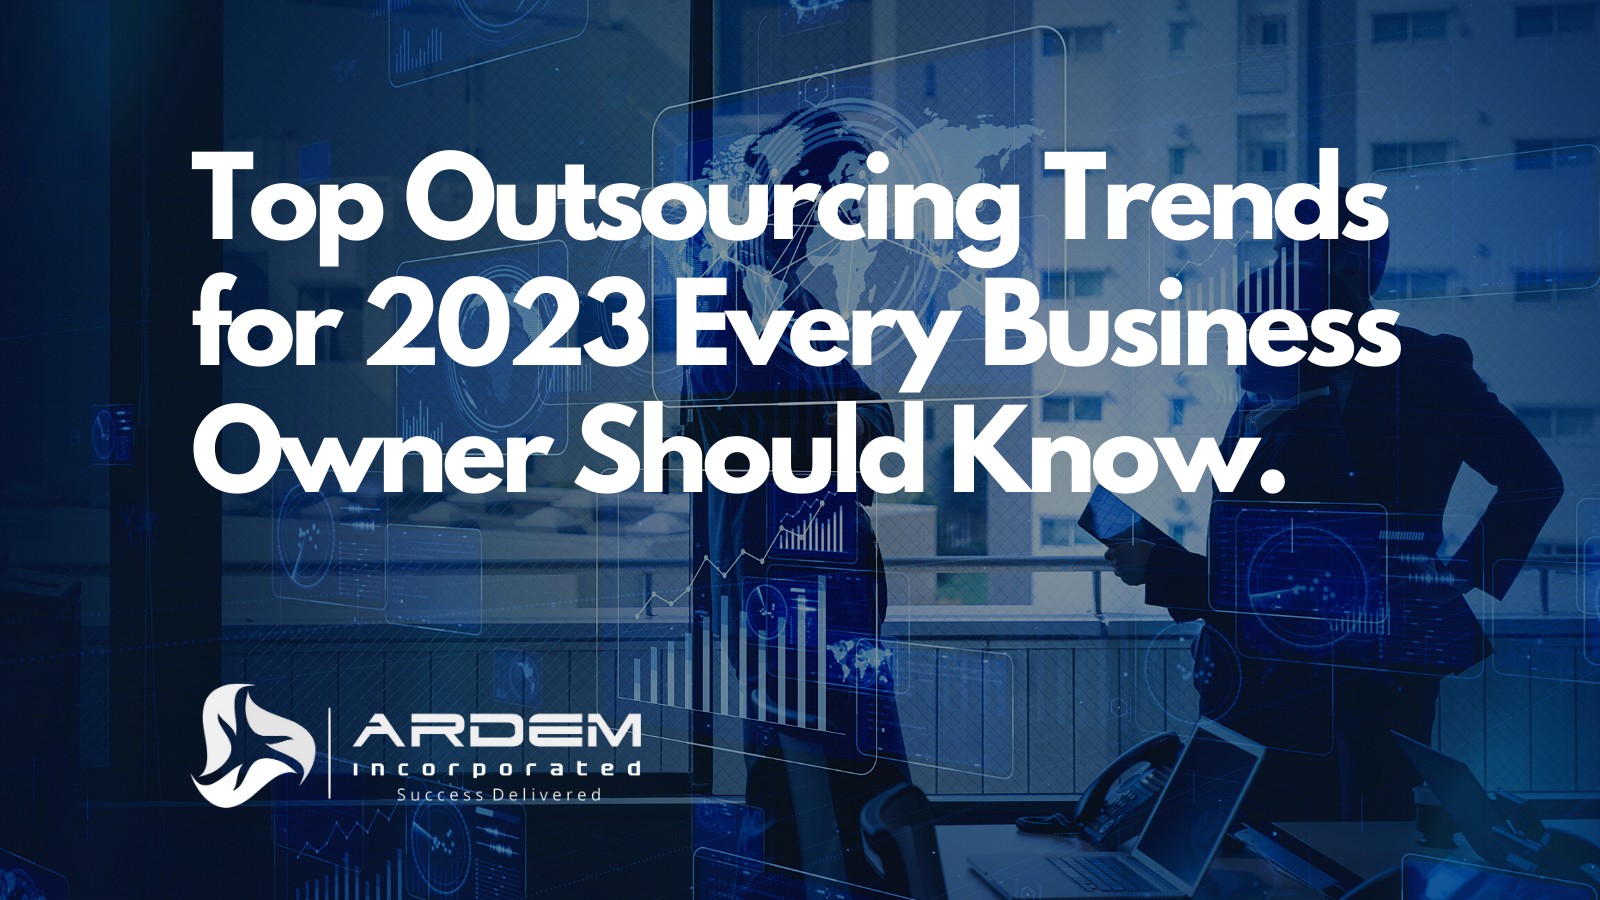 Outsourcing Trends for 2023 blog